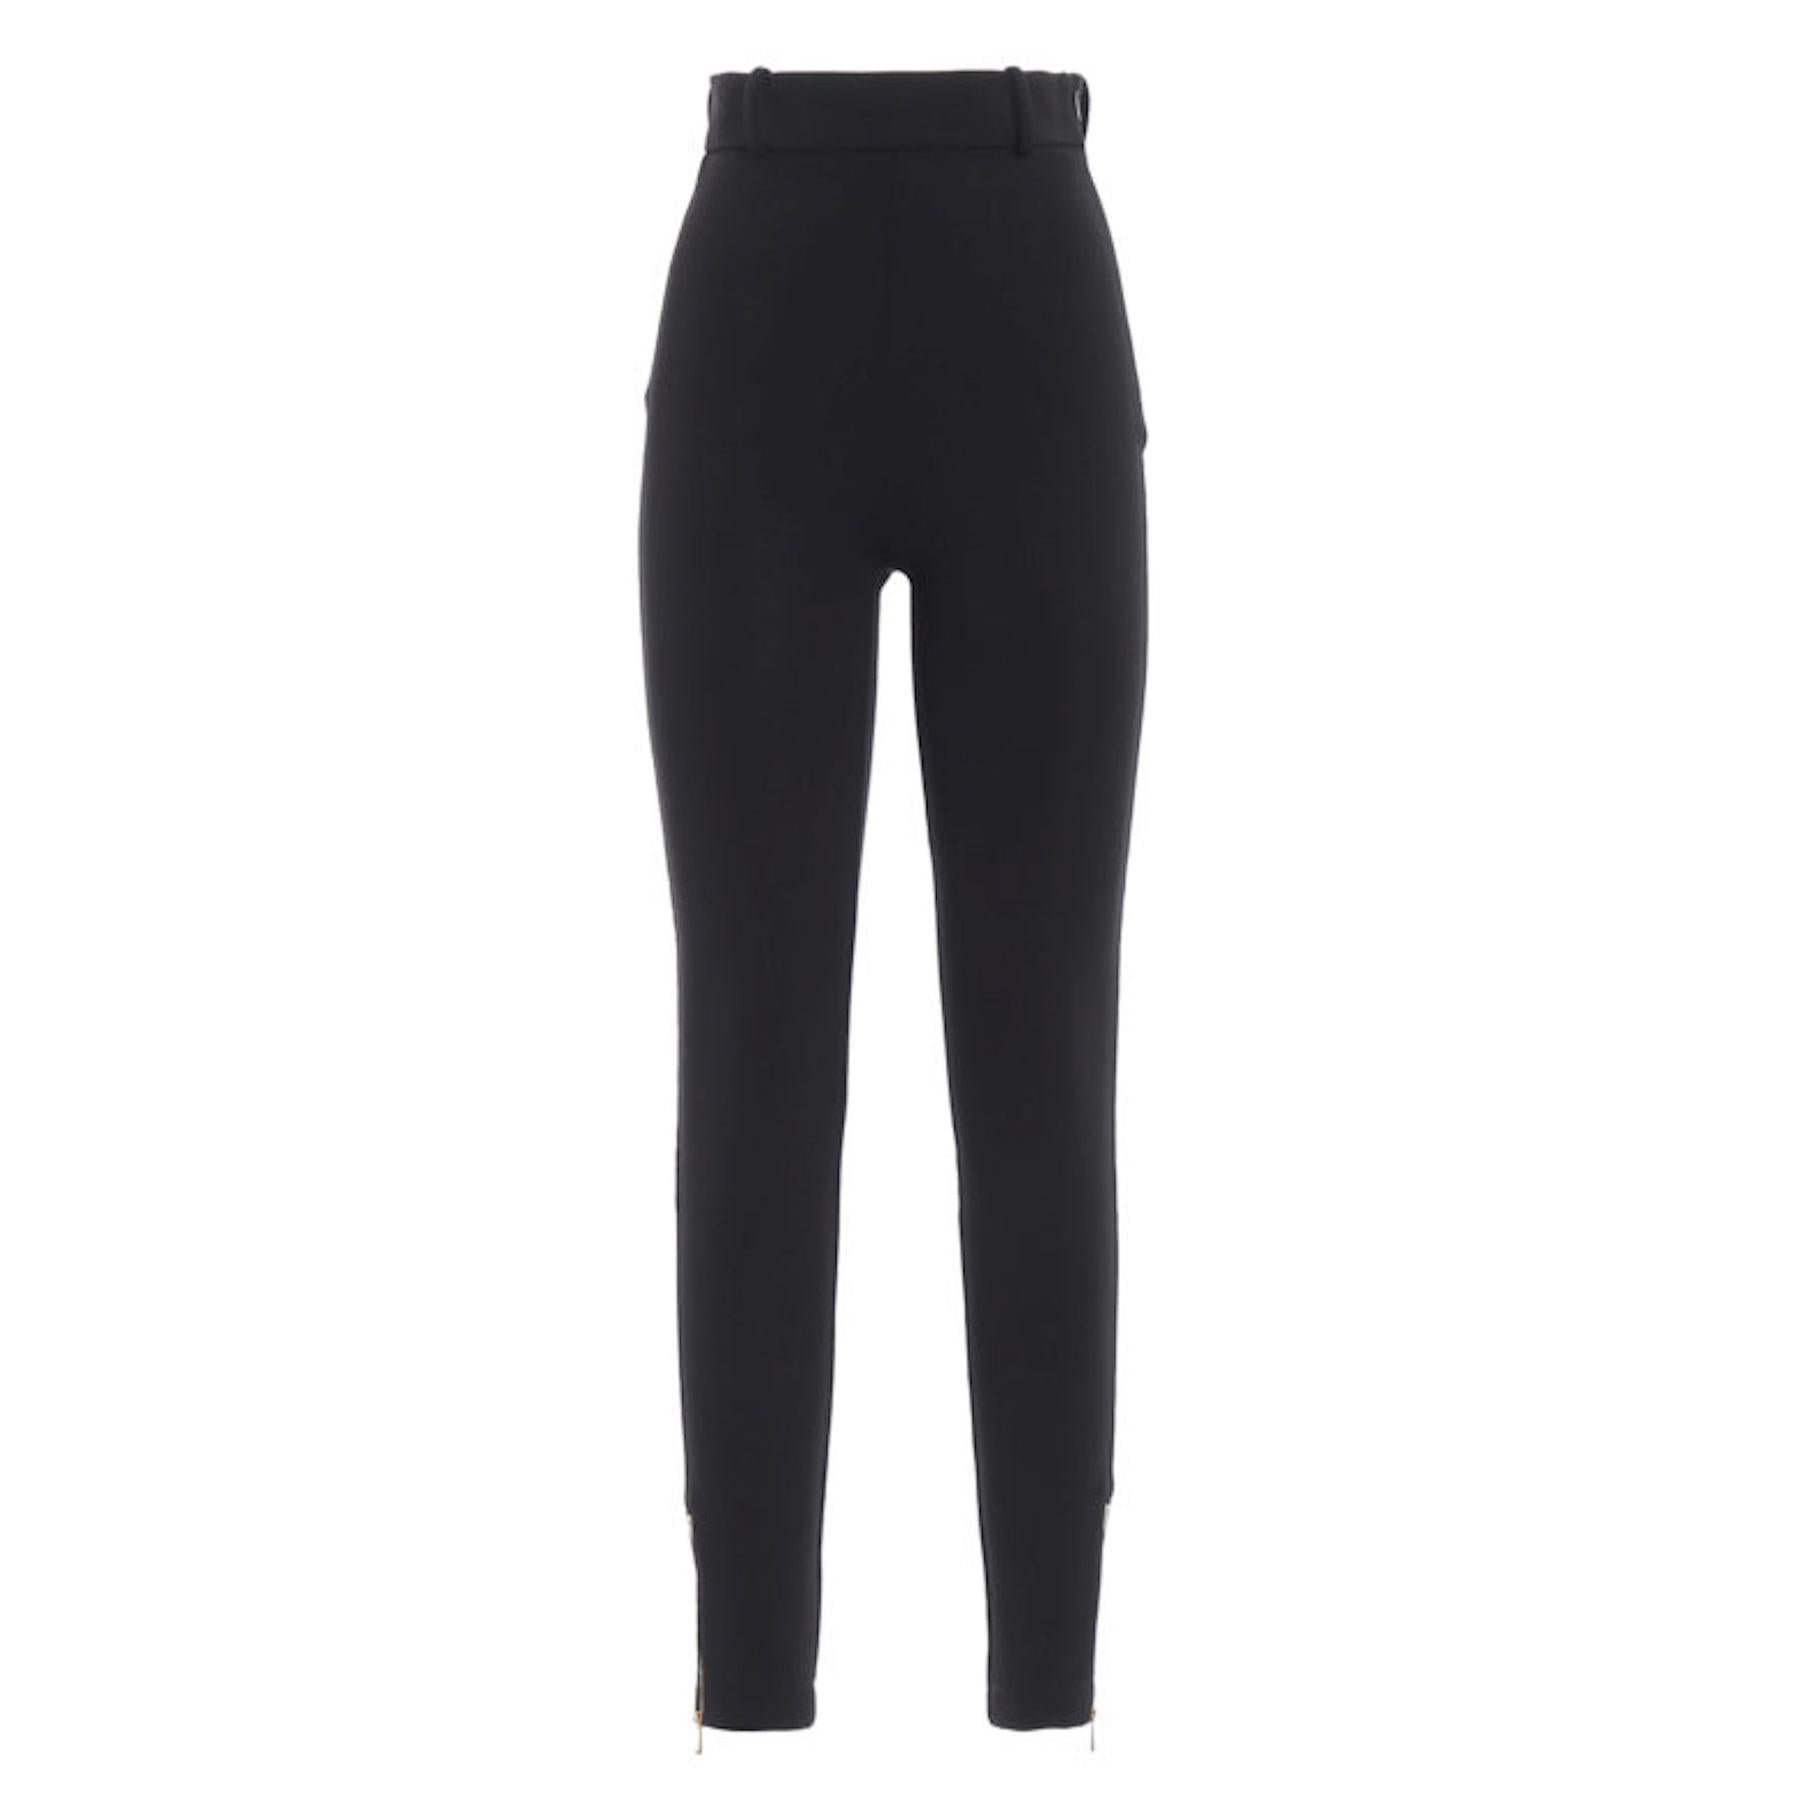 Versace Black Formal Knit Fitted Leggings / Pants Size 36 For Sale